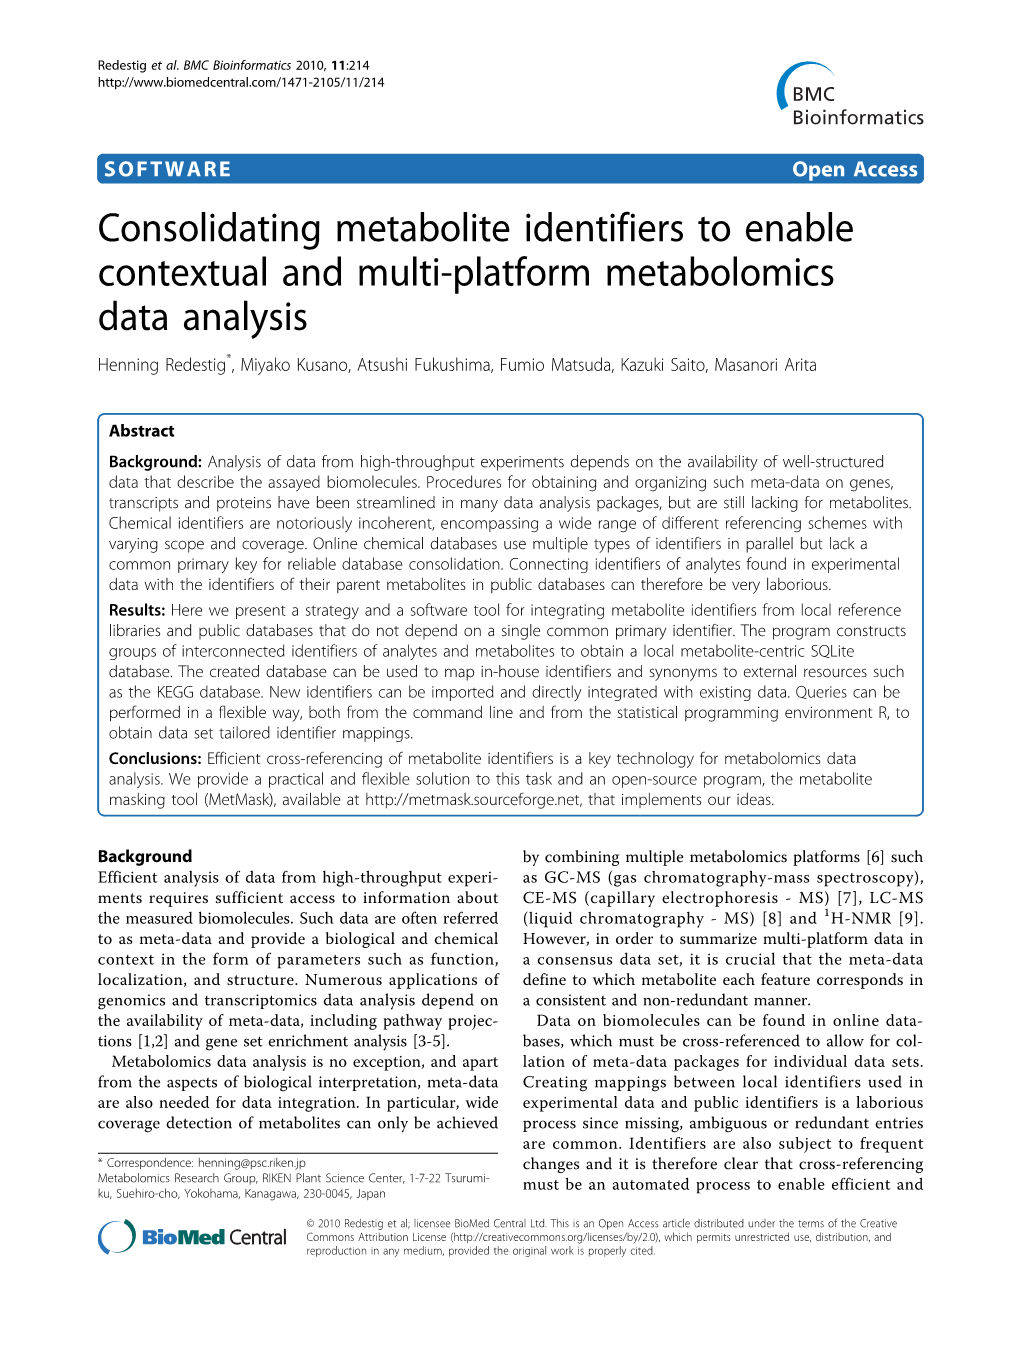 Consolidating Metabolite Identifiers to Enable Contextual and Multi